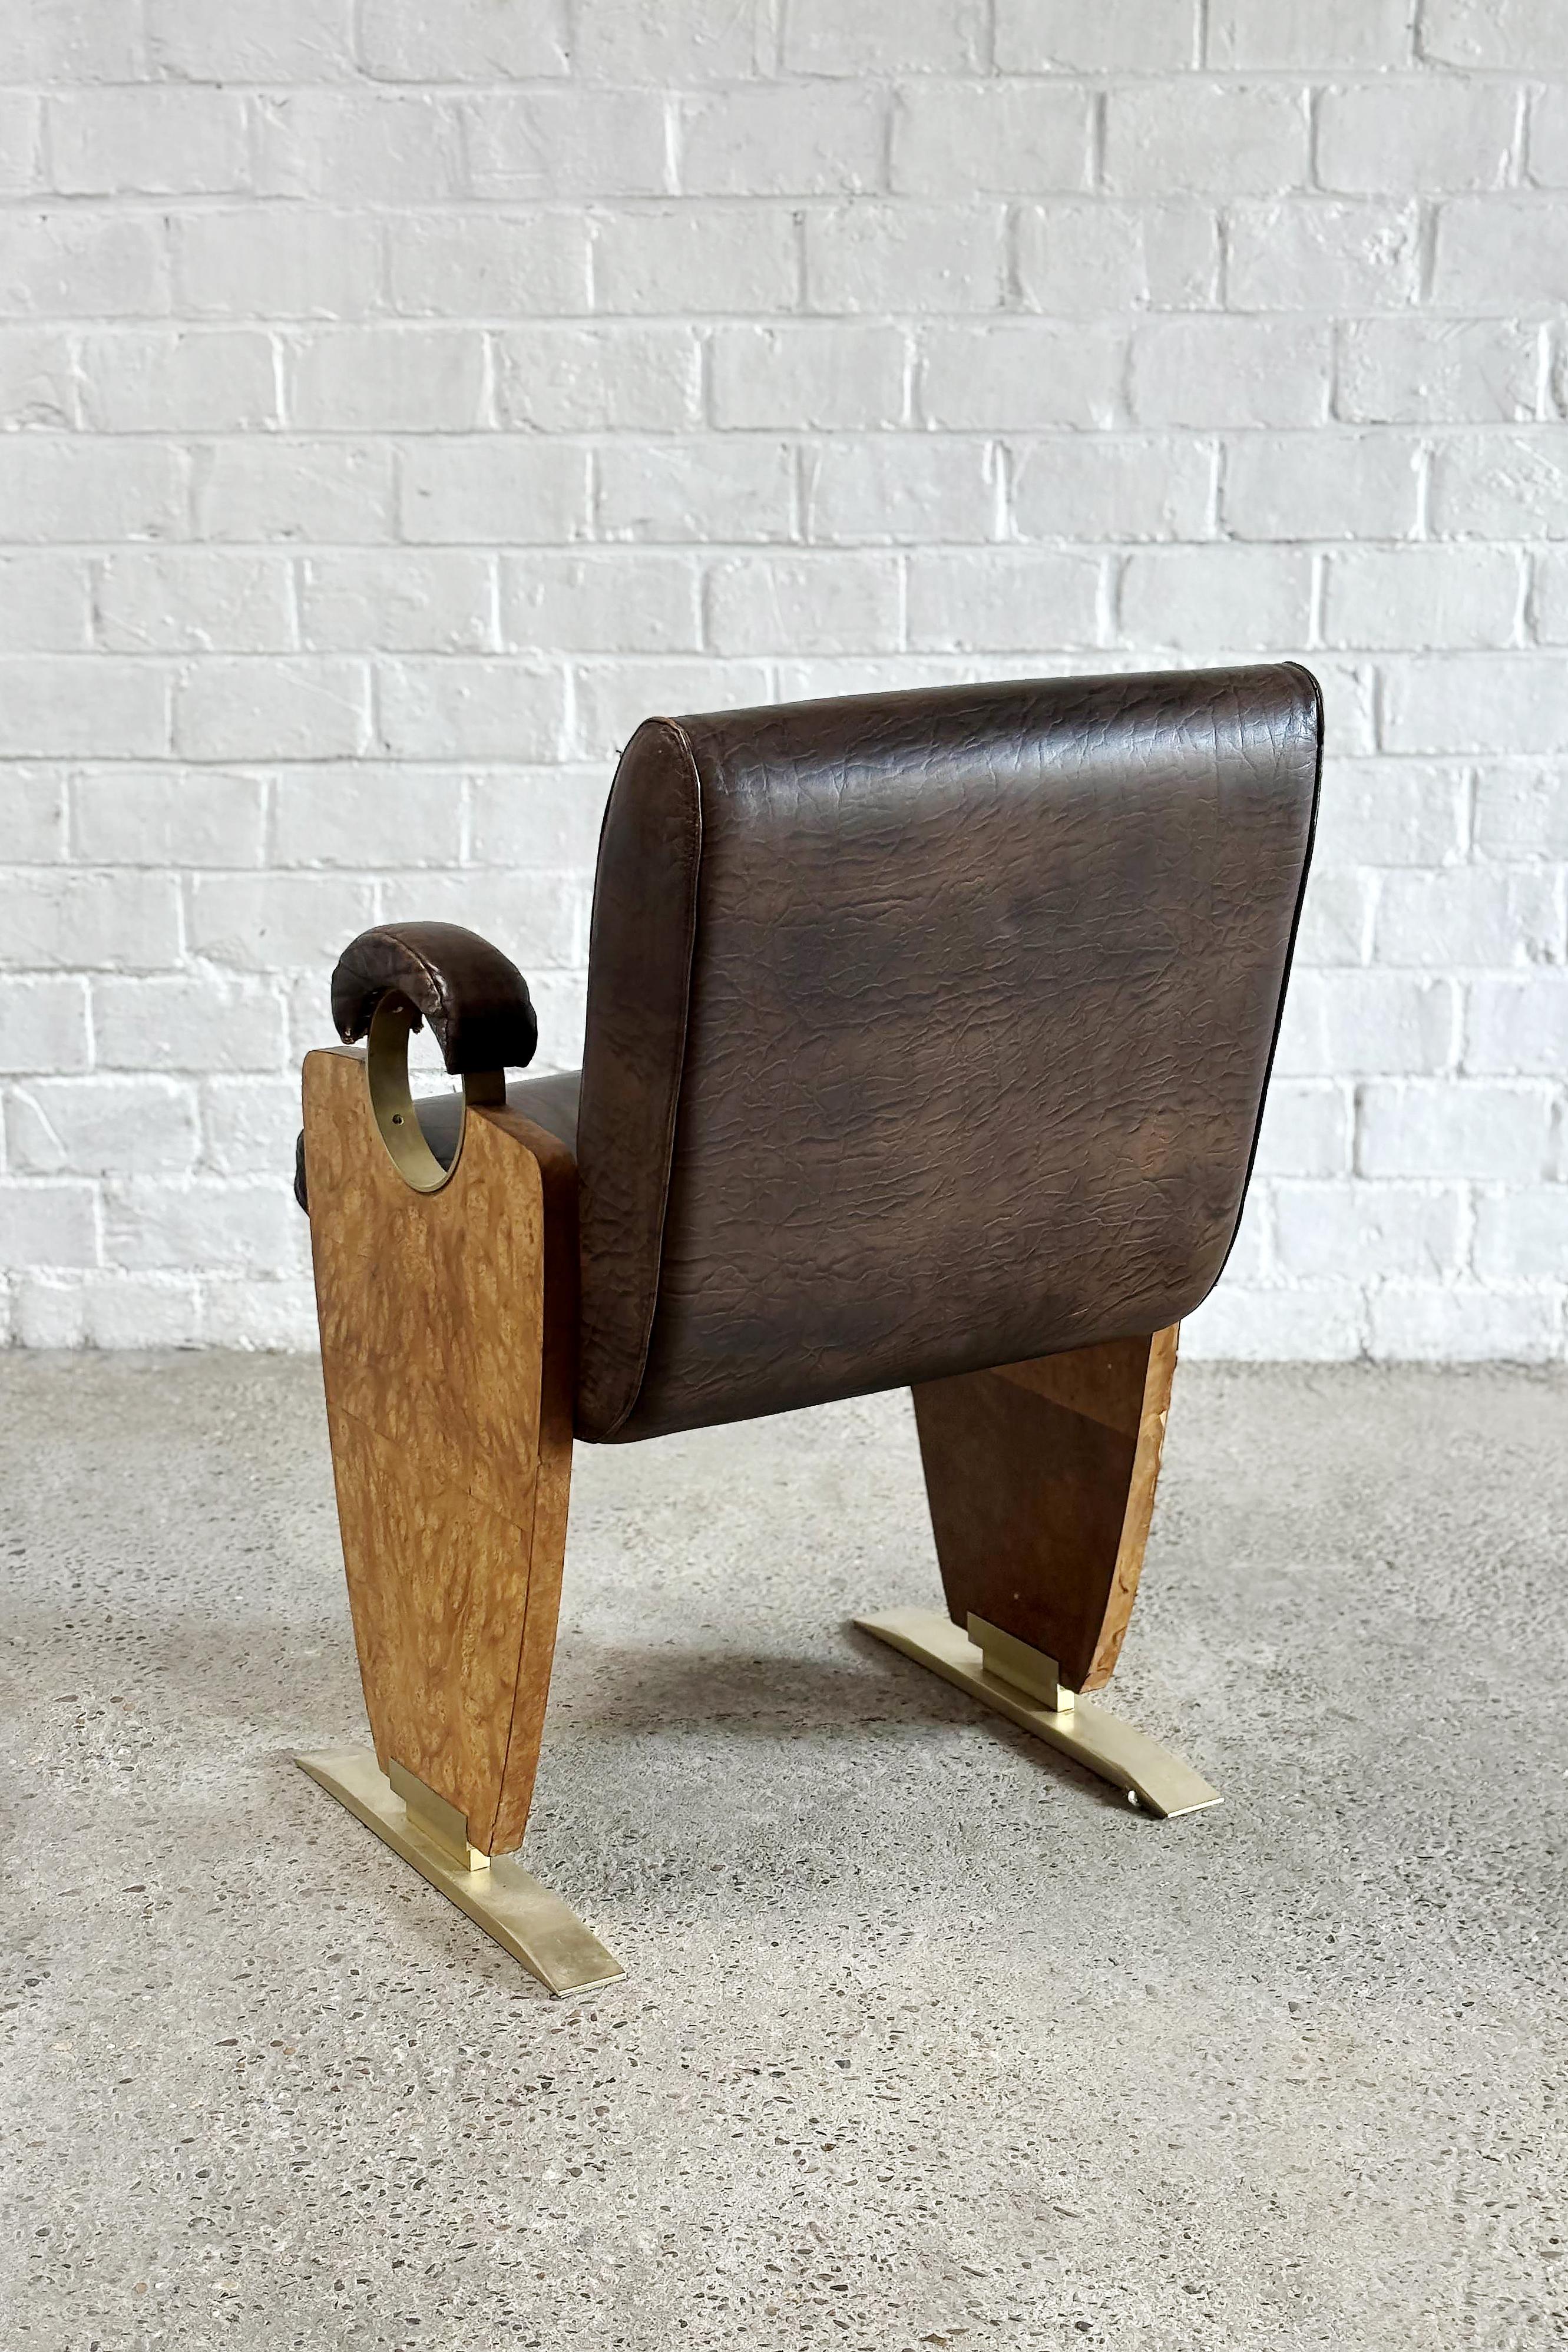 Brass Decorative Leather & Burl Wood Art-Deco Style Lounge Or Side chair, 1970's For Sale